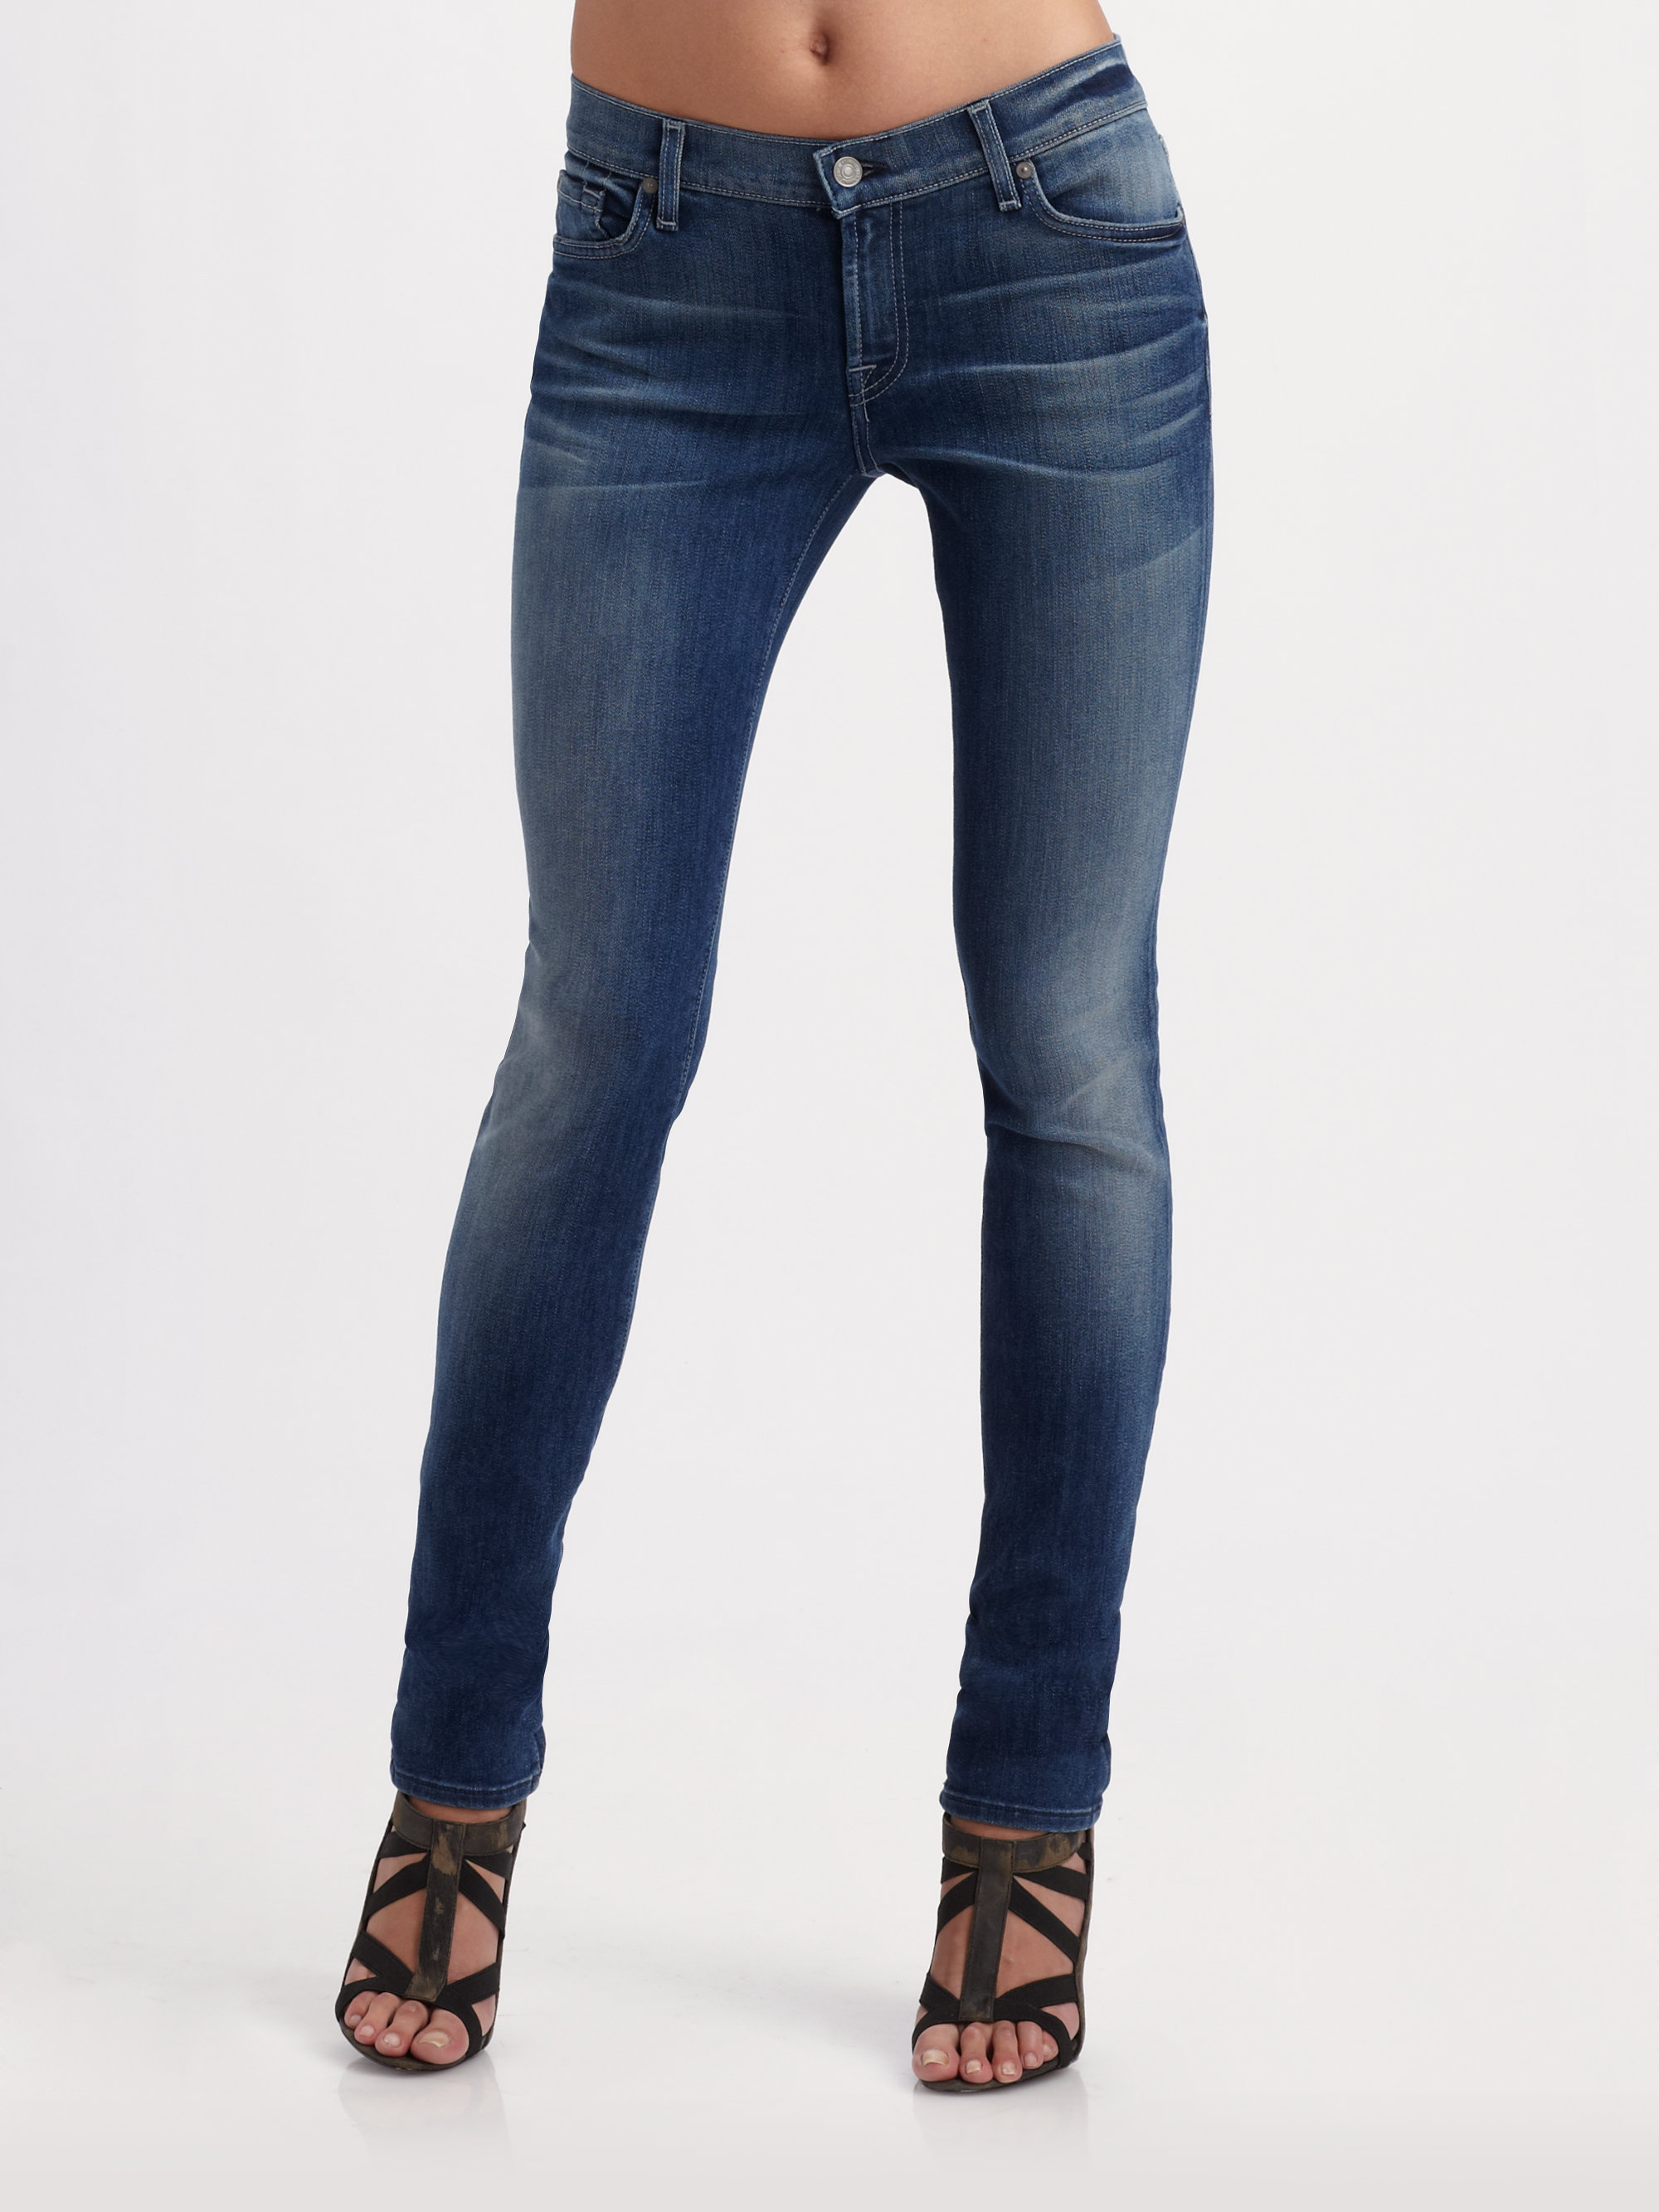 7 For All Mankind Roxanne Skinny Jeans in Blue | Lyst